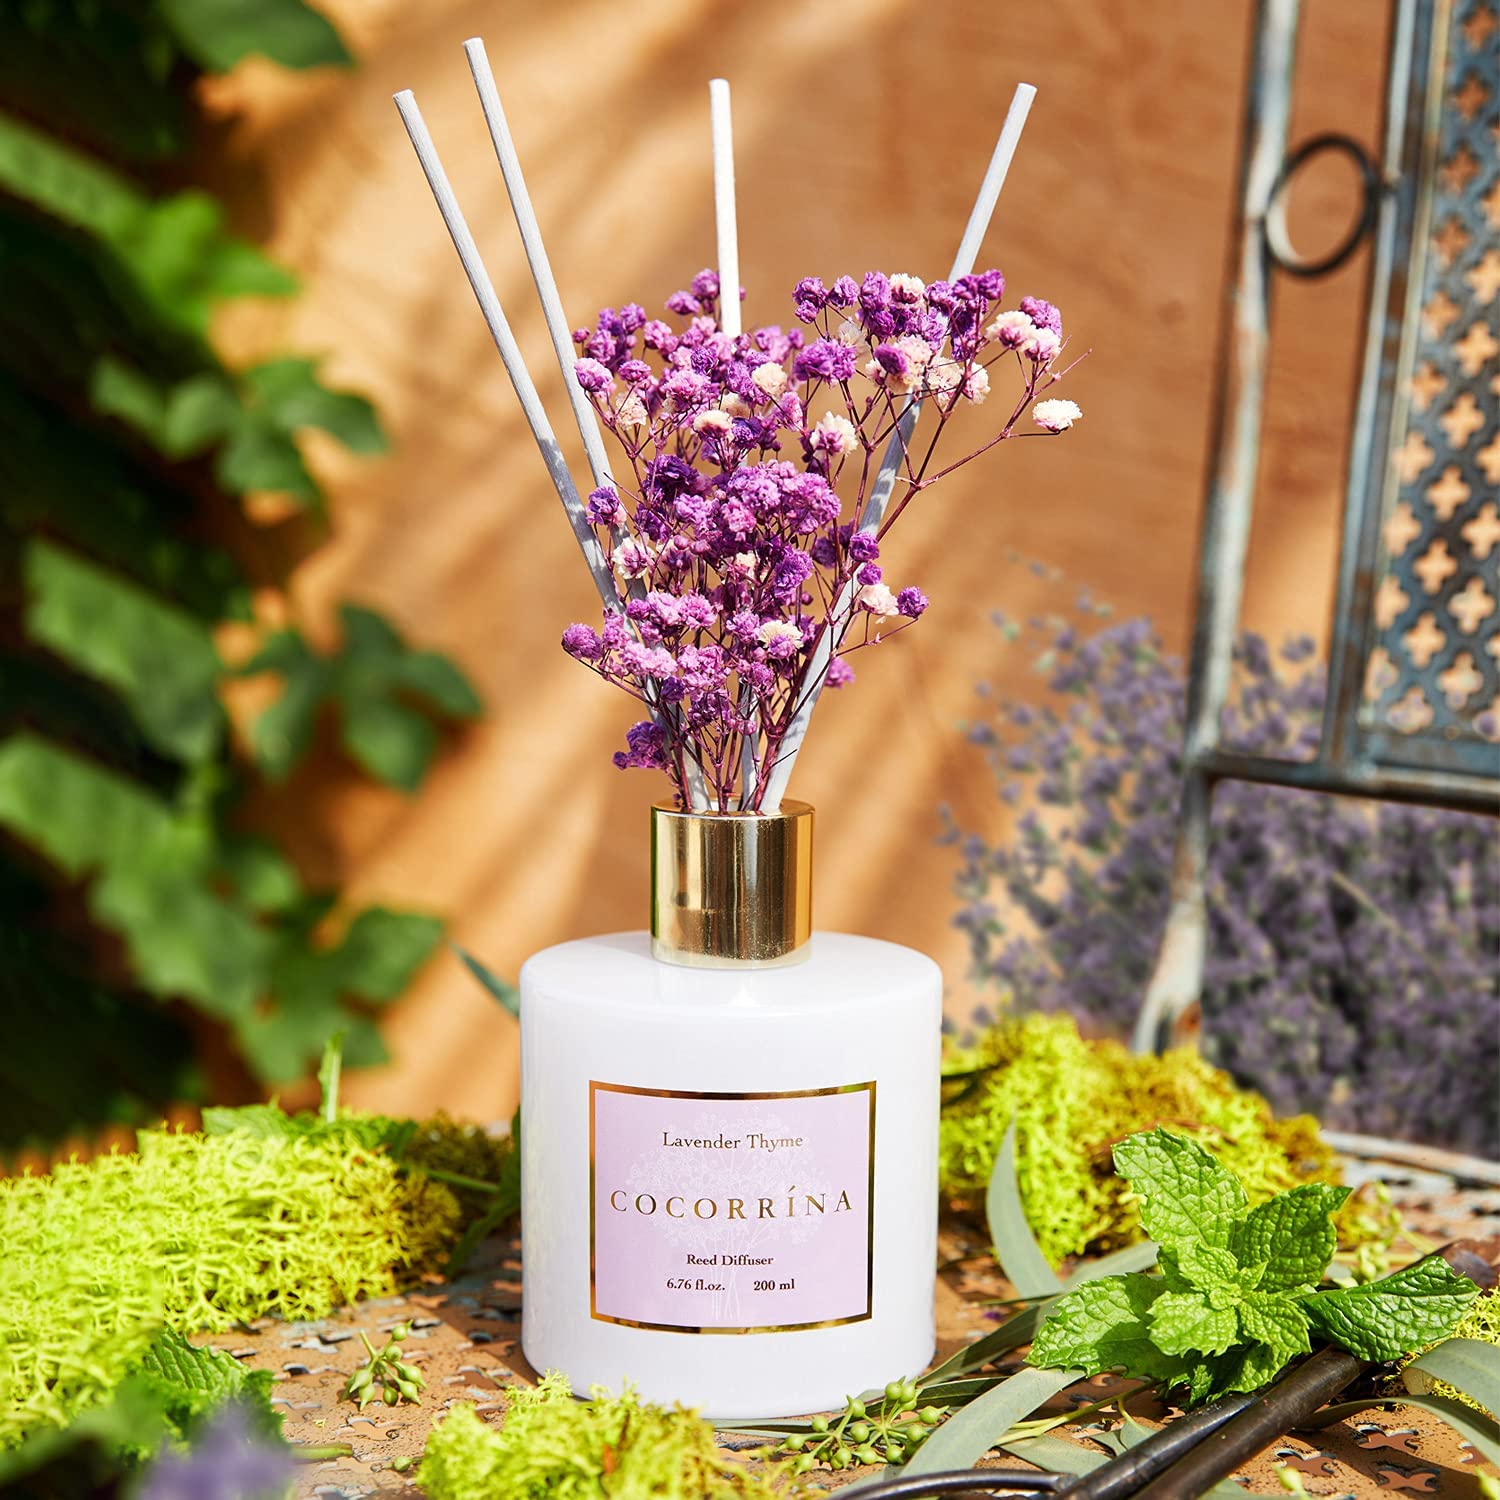 Cocorrína Lavender Thyme Scented Reed Diffuser Oil Refill with 8 Free Cotton Reed Sticks, Home Fragrance for Bedroom, Bathroom, Oil Diffuser Home